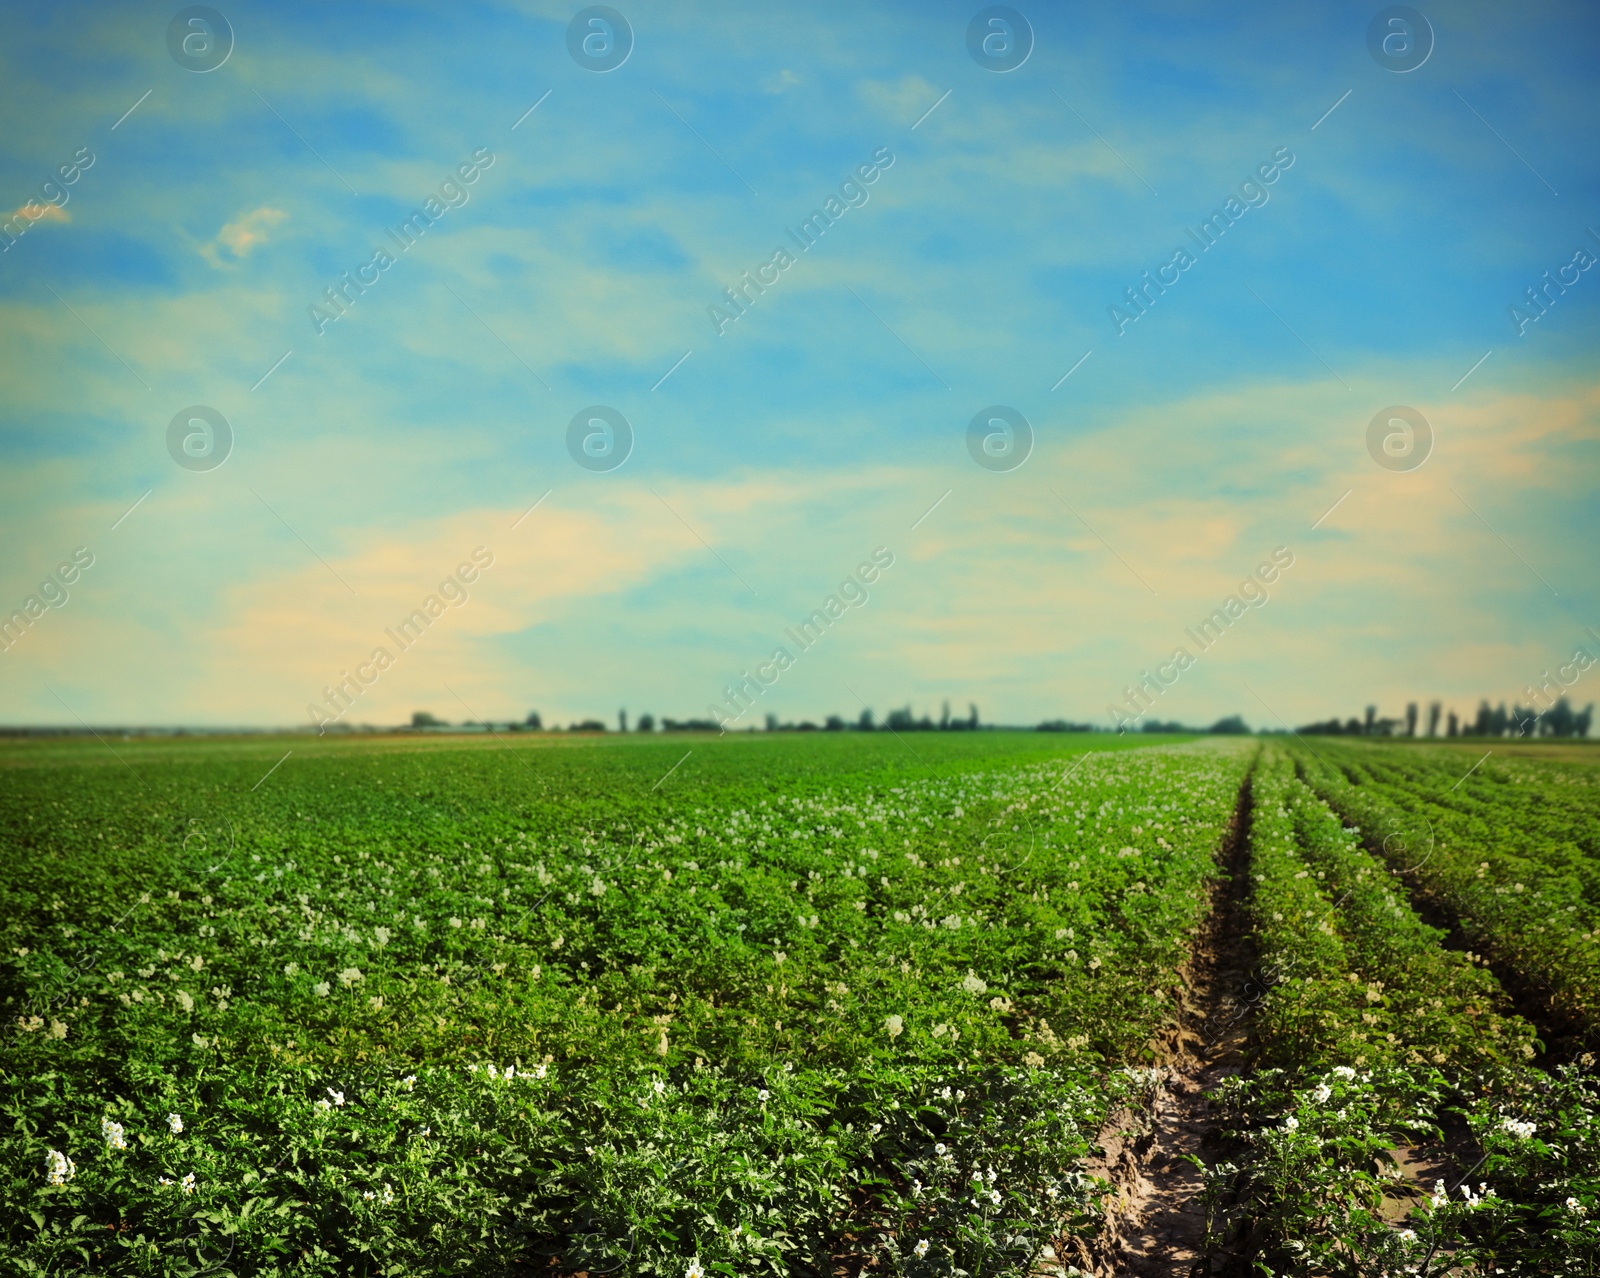 Image of Picturesque view of blooming potato field against blue sky with clouds on sunny day. Organic farming